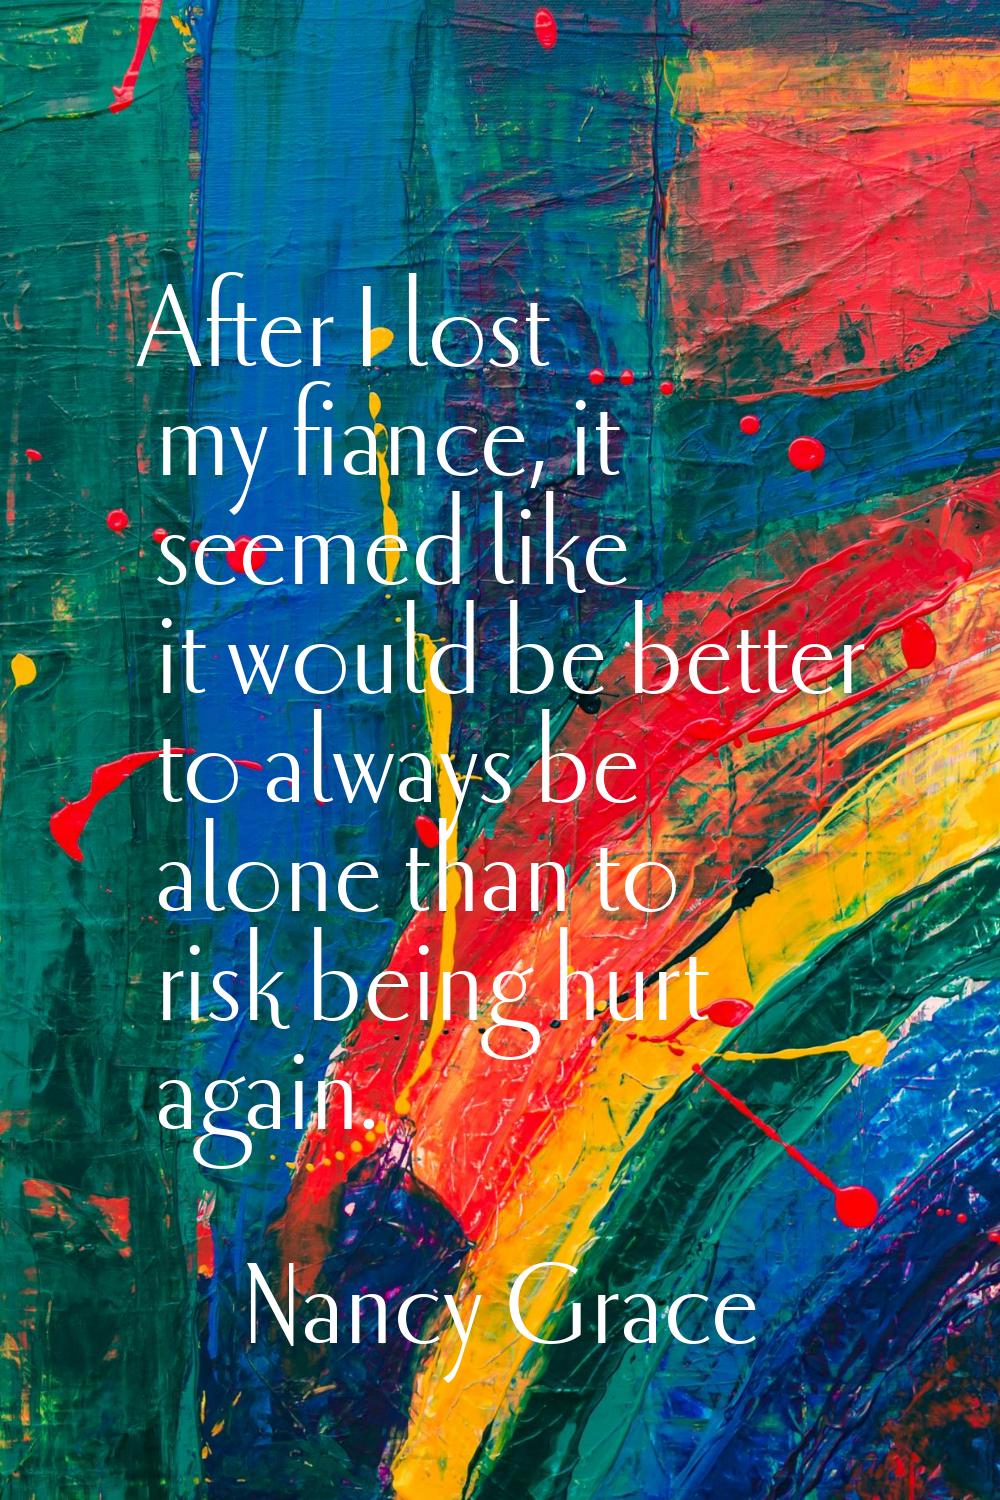 After I lost my fiance, it seemed like it would be better to always be alone than to risk being hur